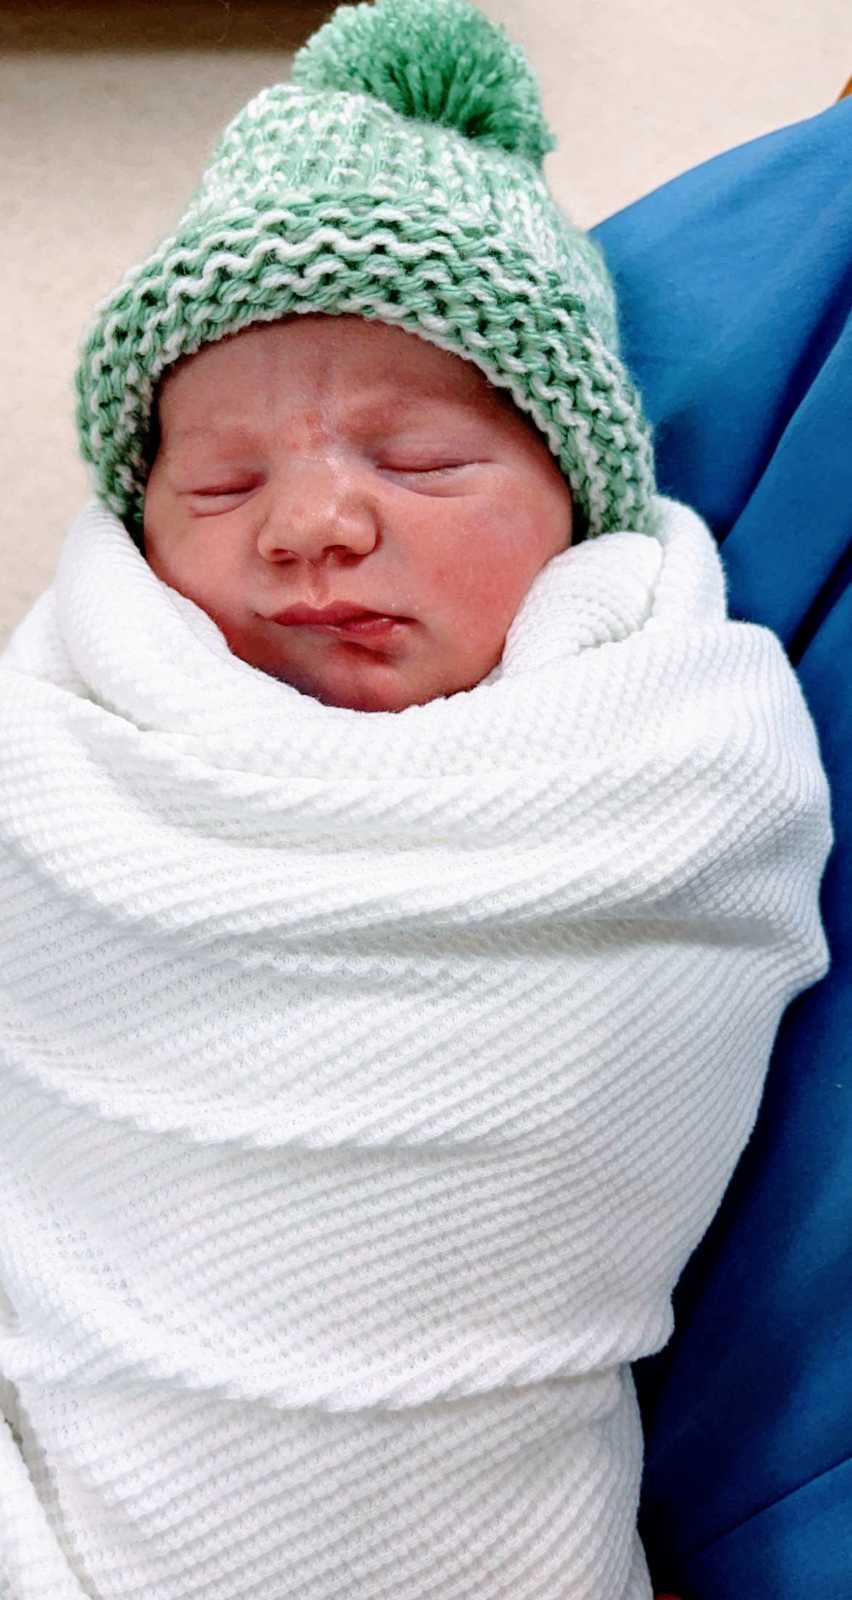 Mom takes photo of her newborn baby swaddled in a white blanket and wearing a green and white knit beanie